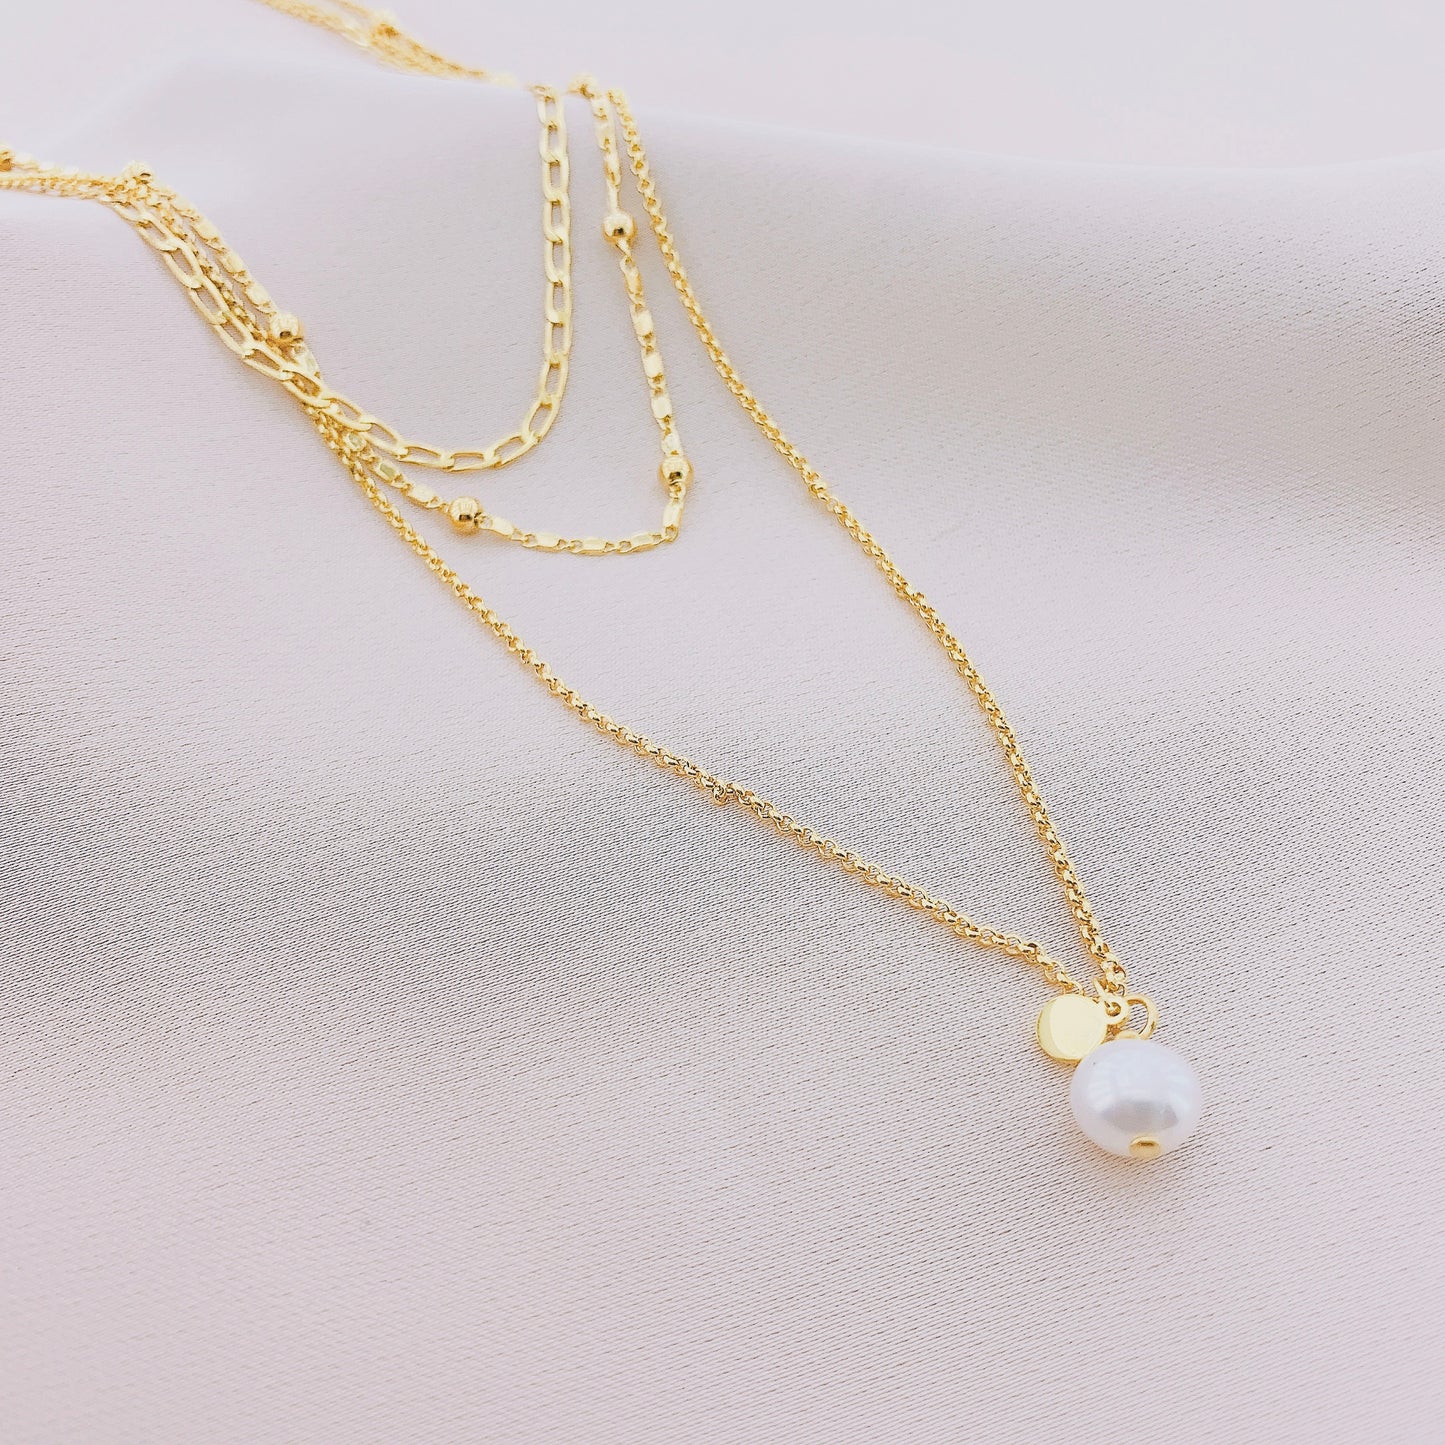 Women's Long Layer Chain Pearl Necklace